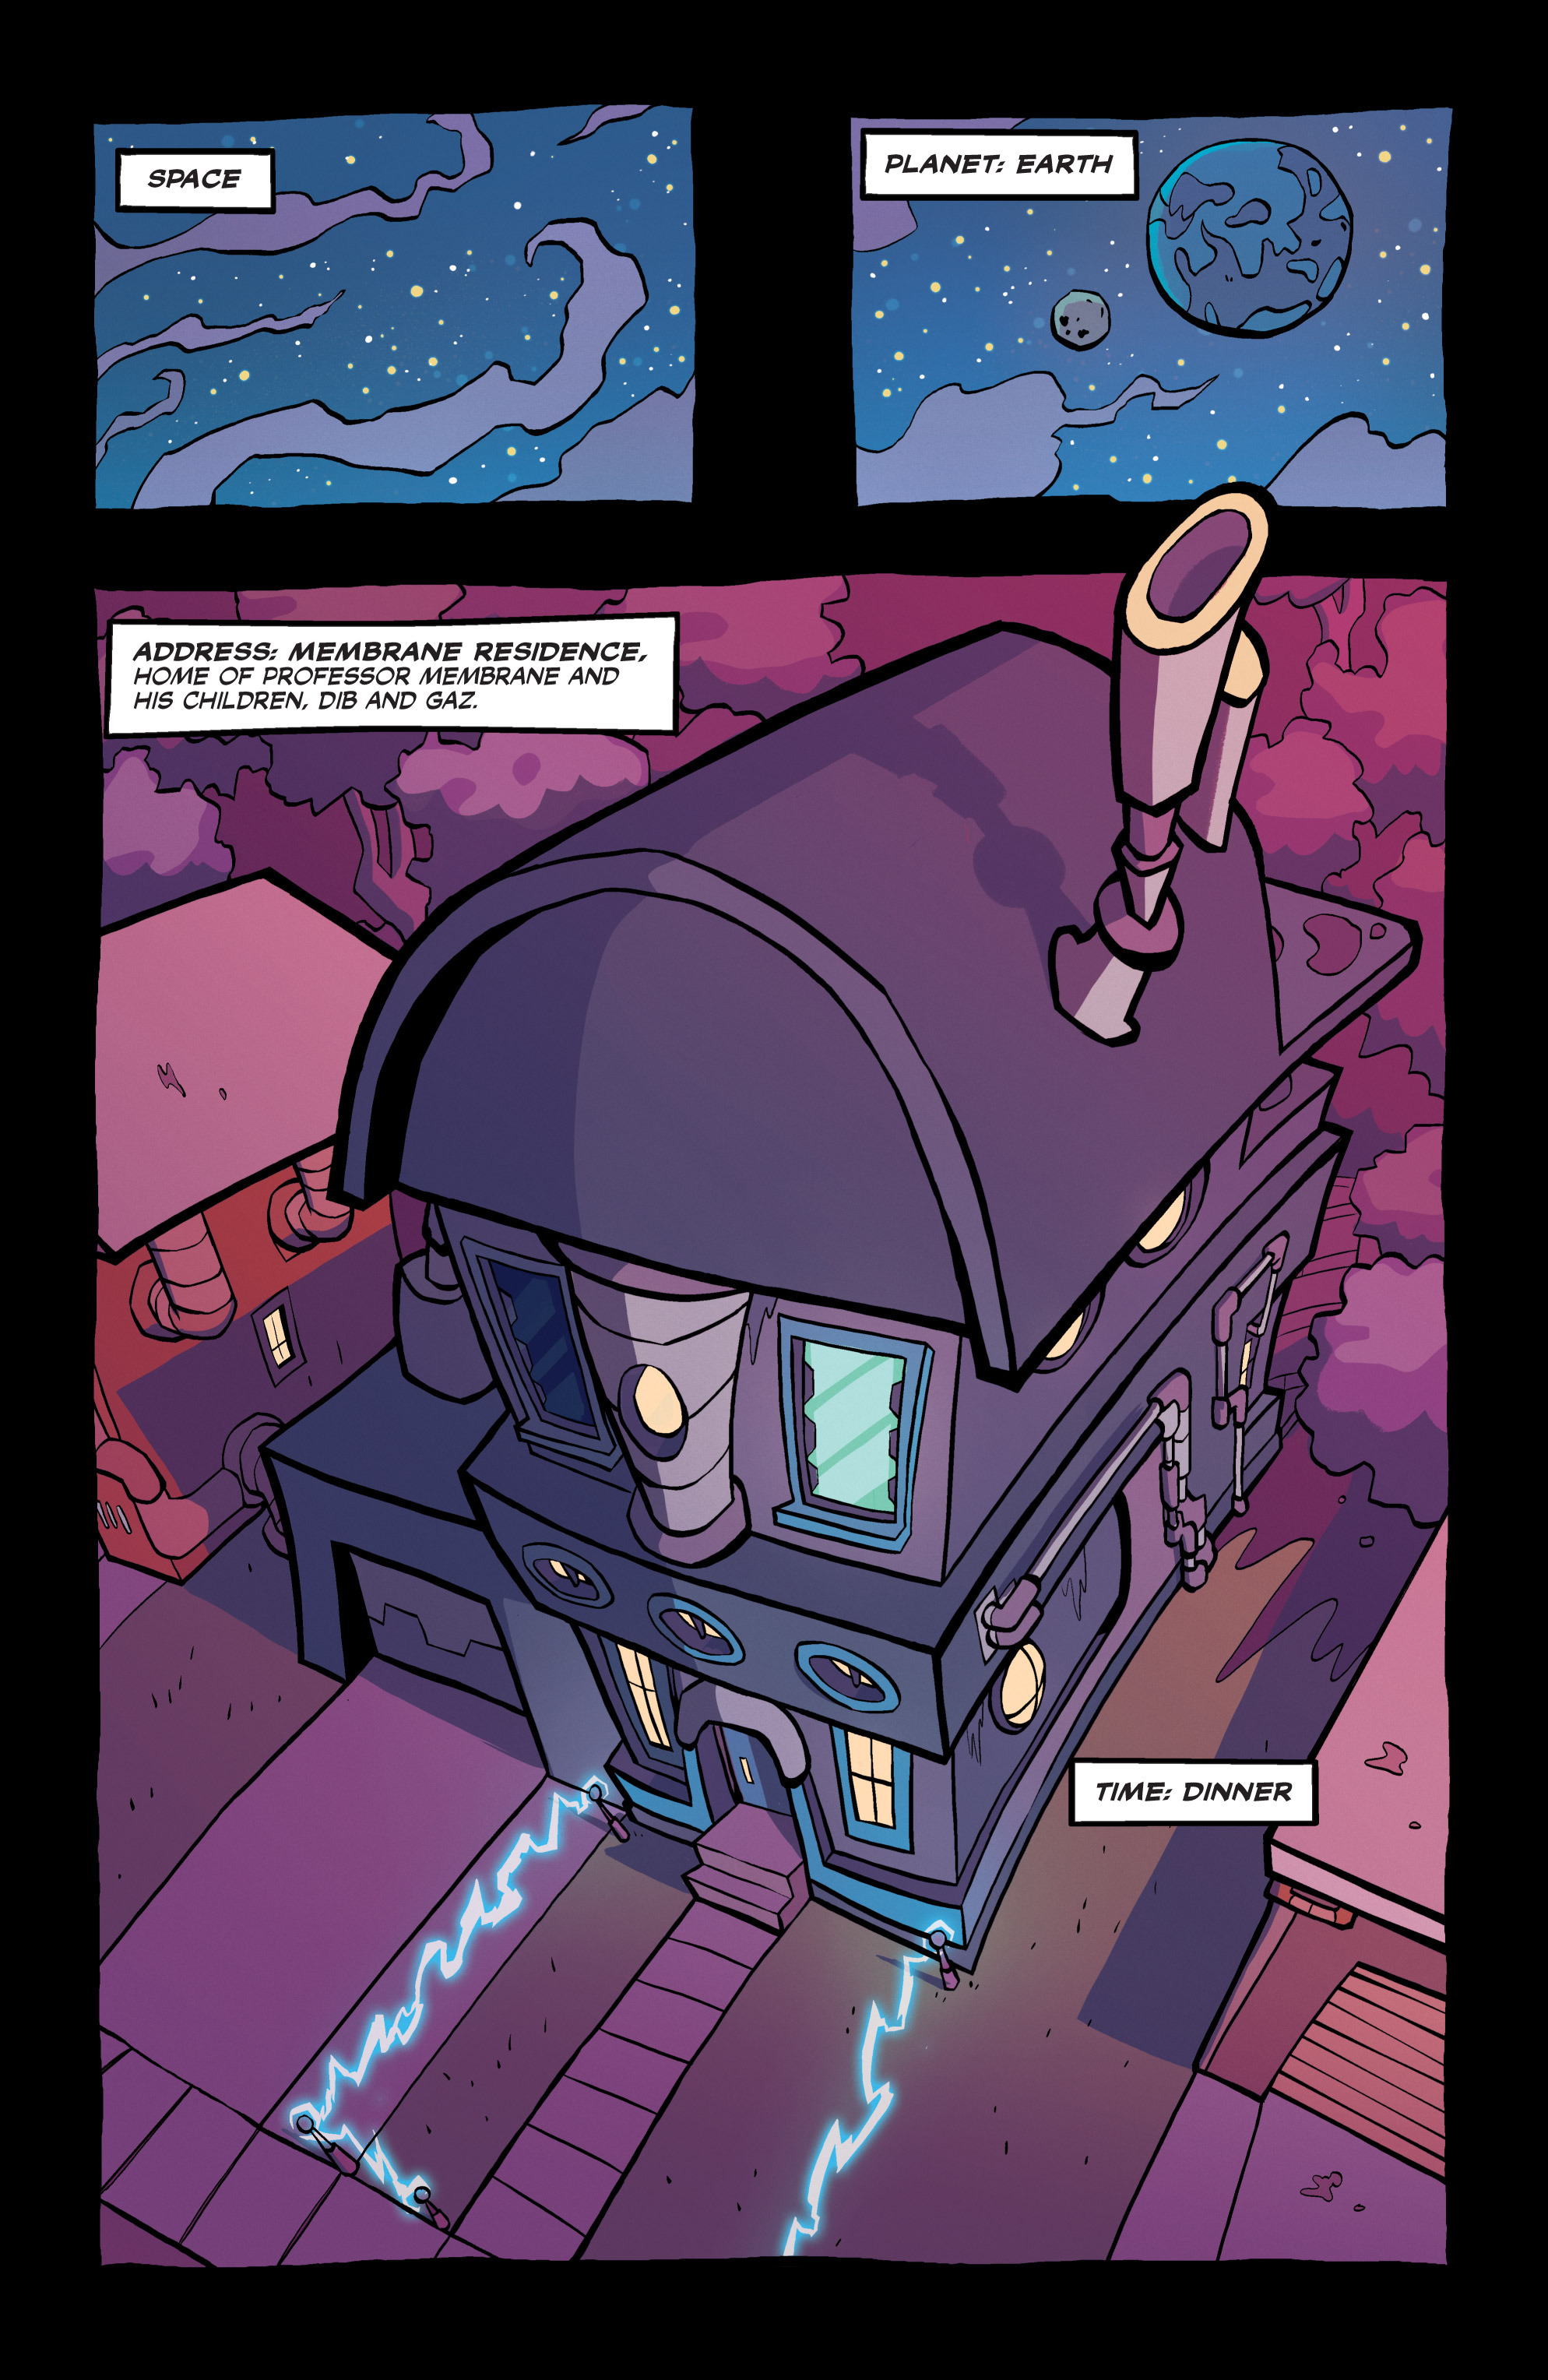 Invader Zim (2015-): Chapter 1 - Page 5.